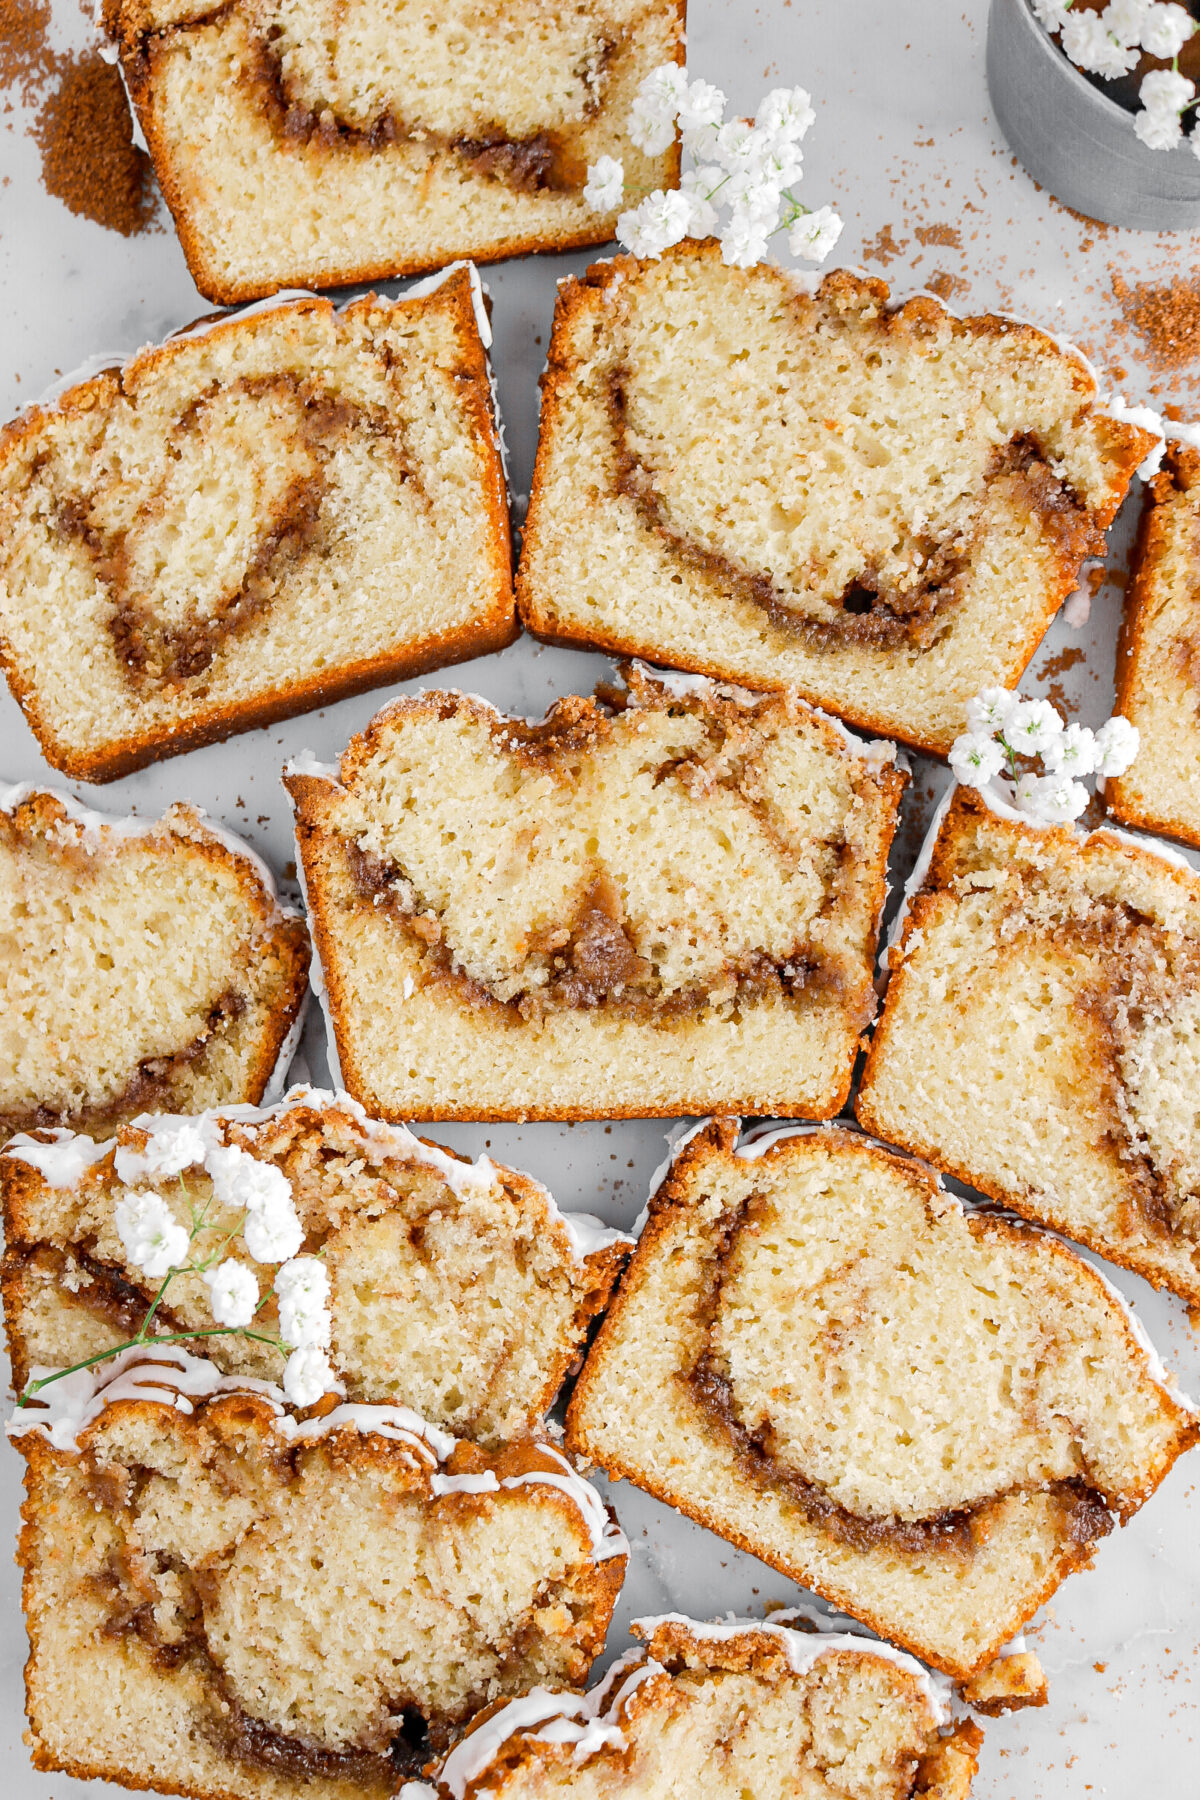 overhead image of eleven slices of cinnamon swirl bread on marble surface with white flowers around.